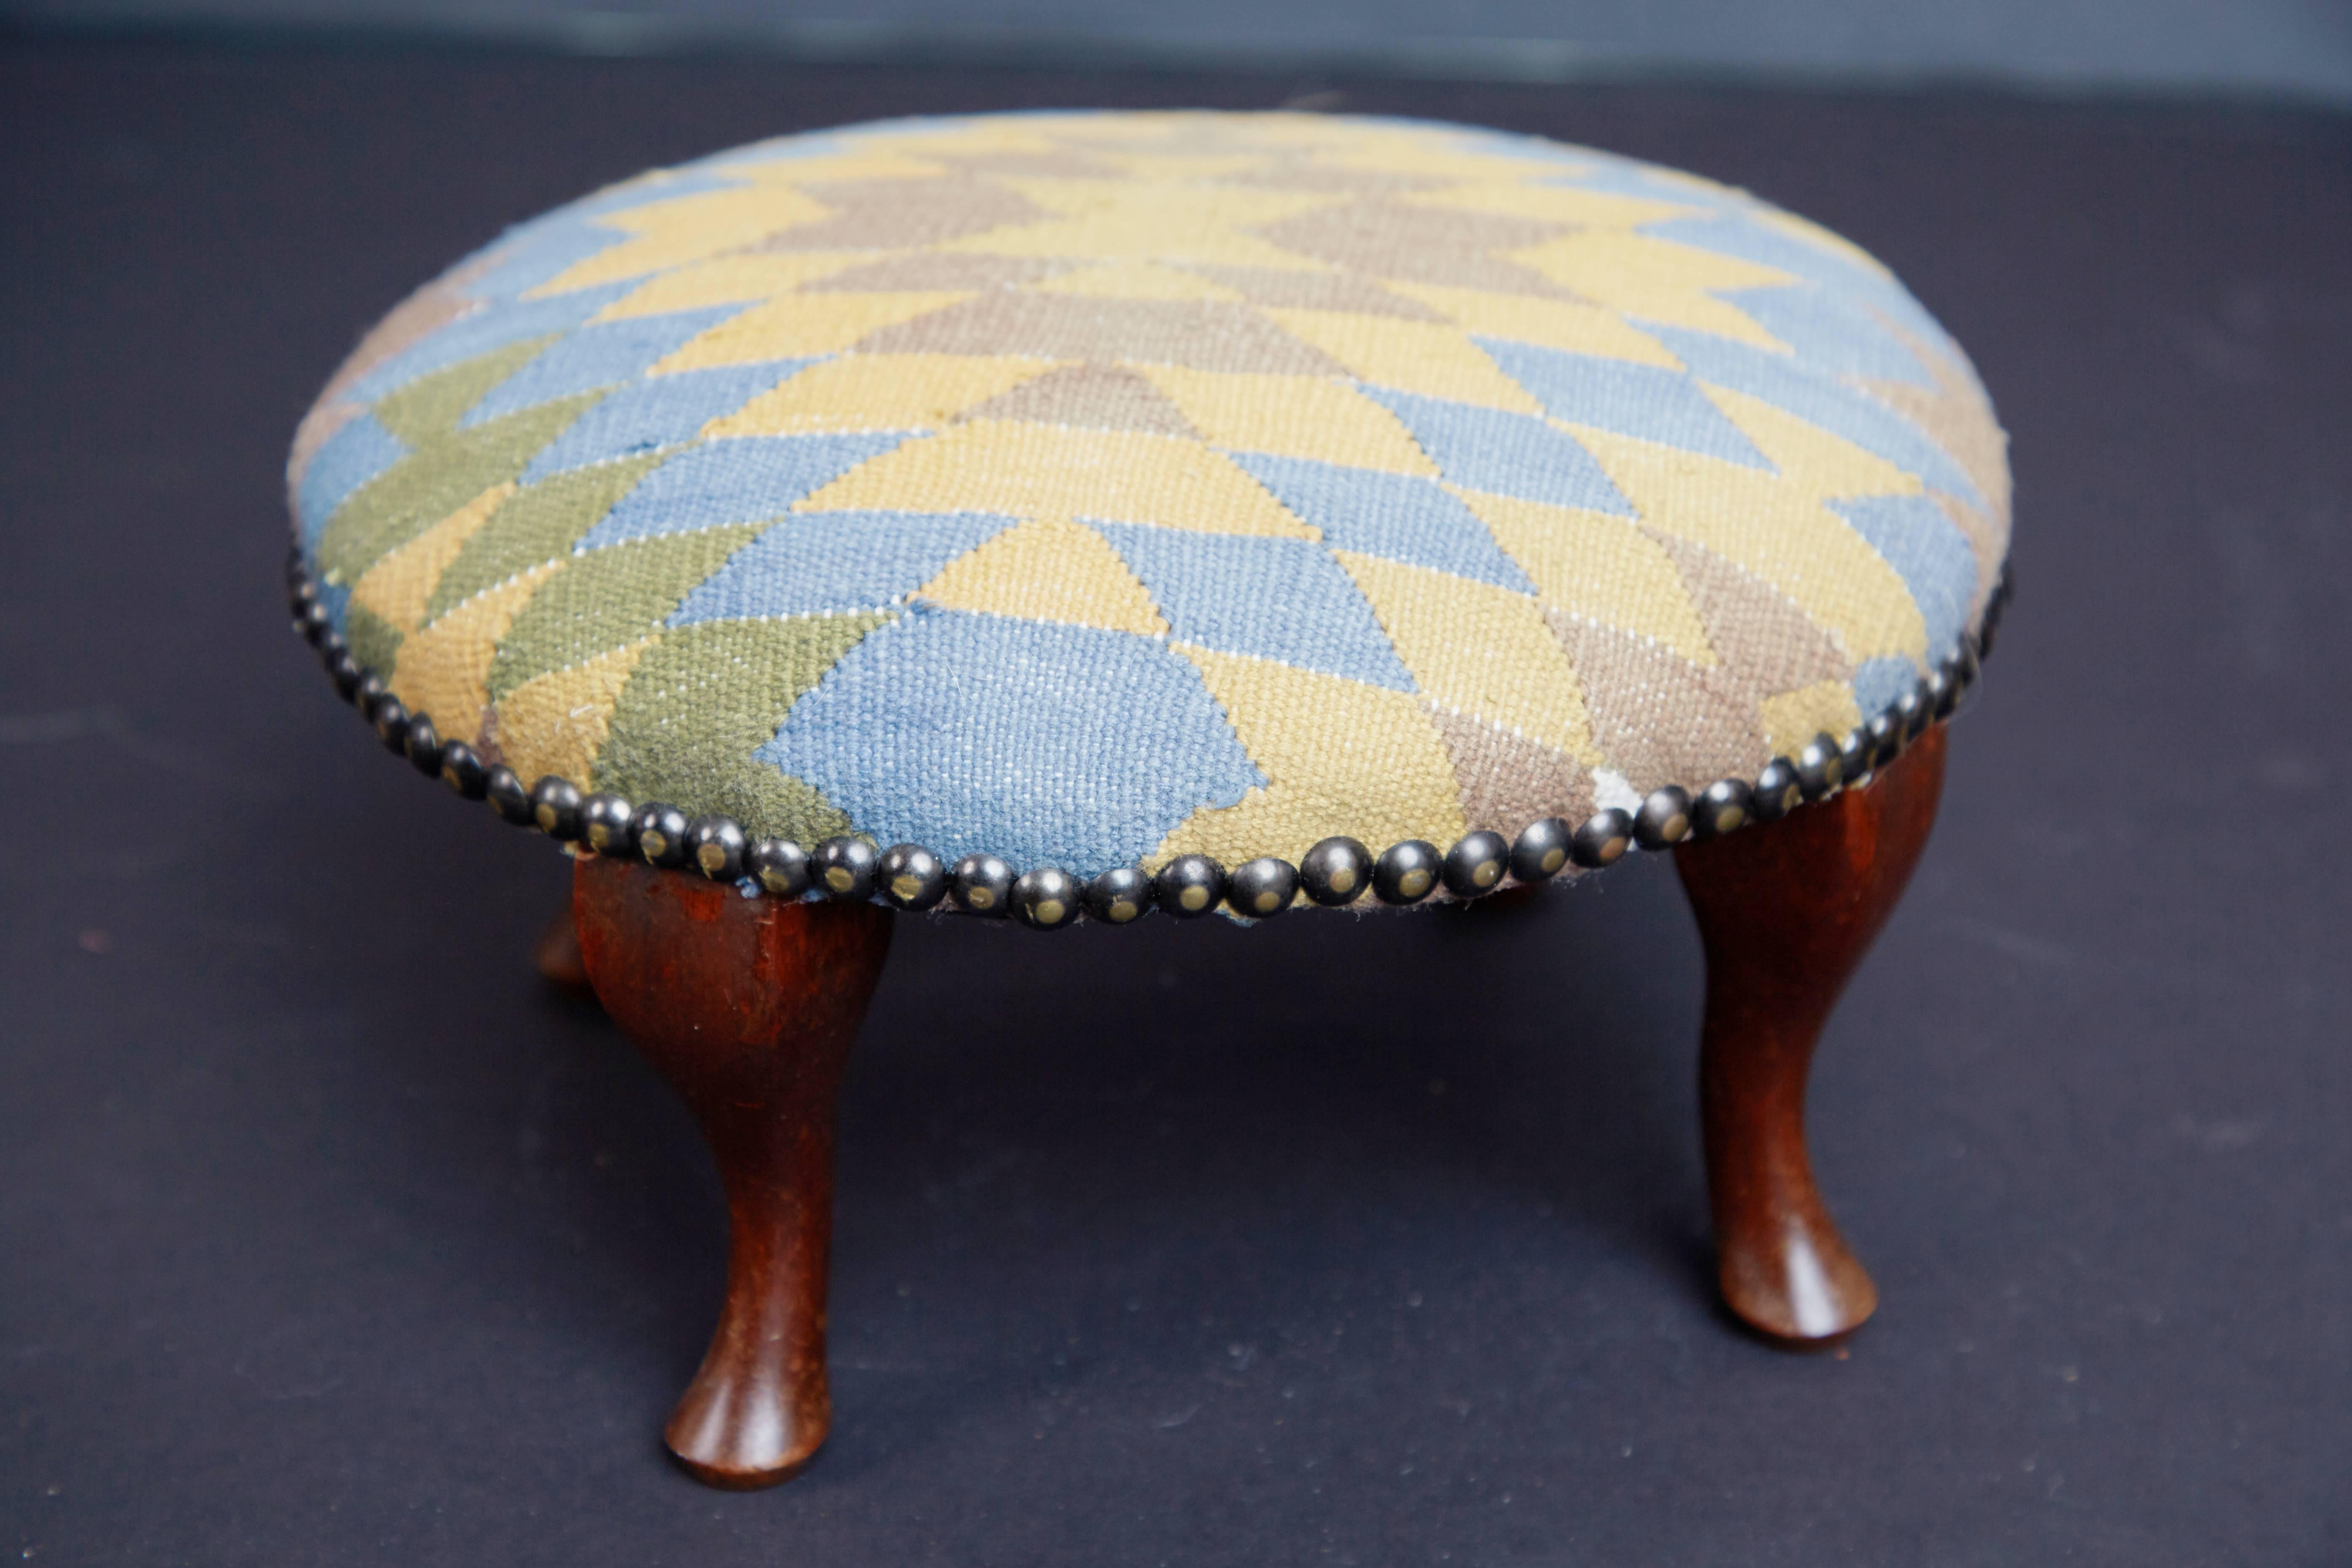 Beautifully restored petite Victorian footstool or ottoman that has been recently reupholstered by using an on trend vintage Moroccan Kilim rug. The subtly curved walnut legs have been refinished in a rich dark stain and the rug upholstery is